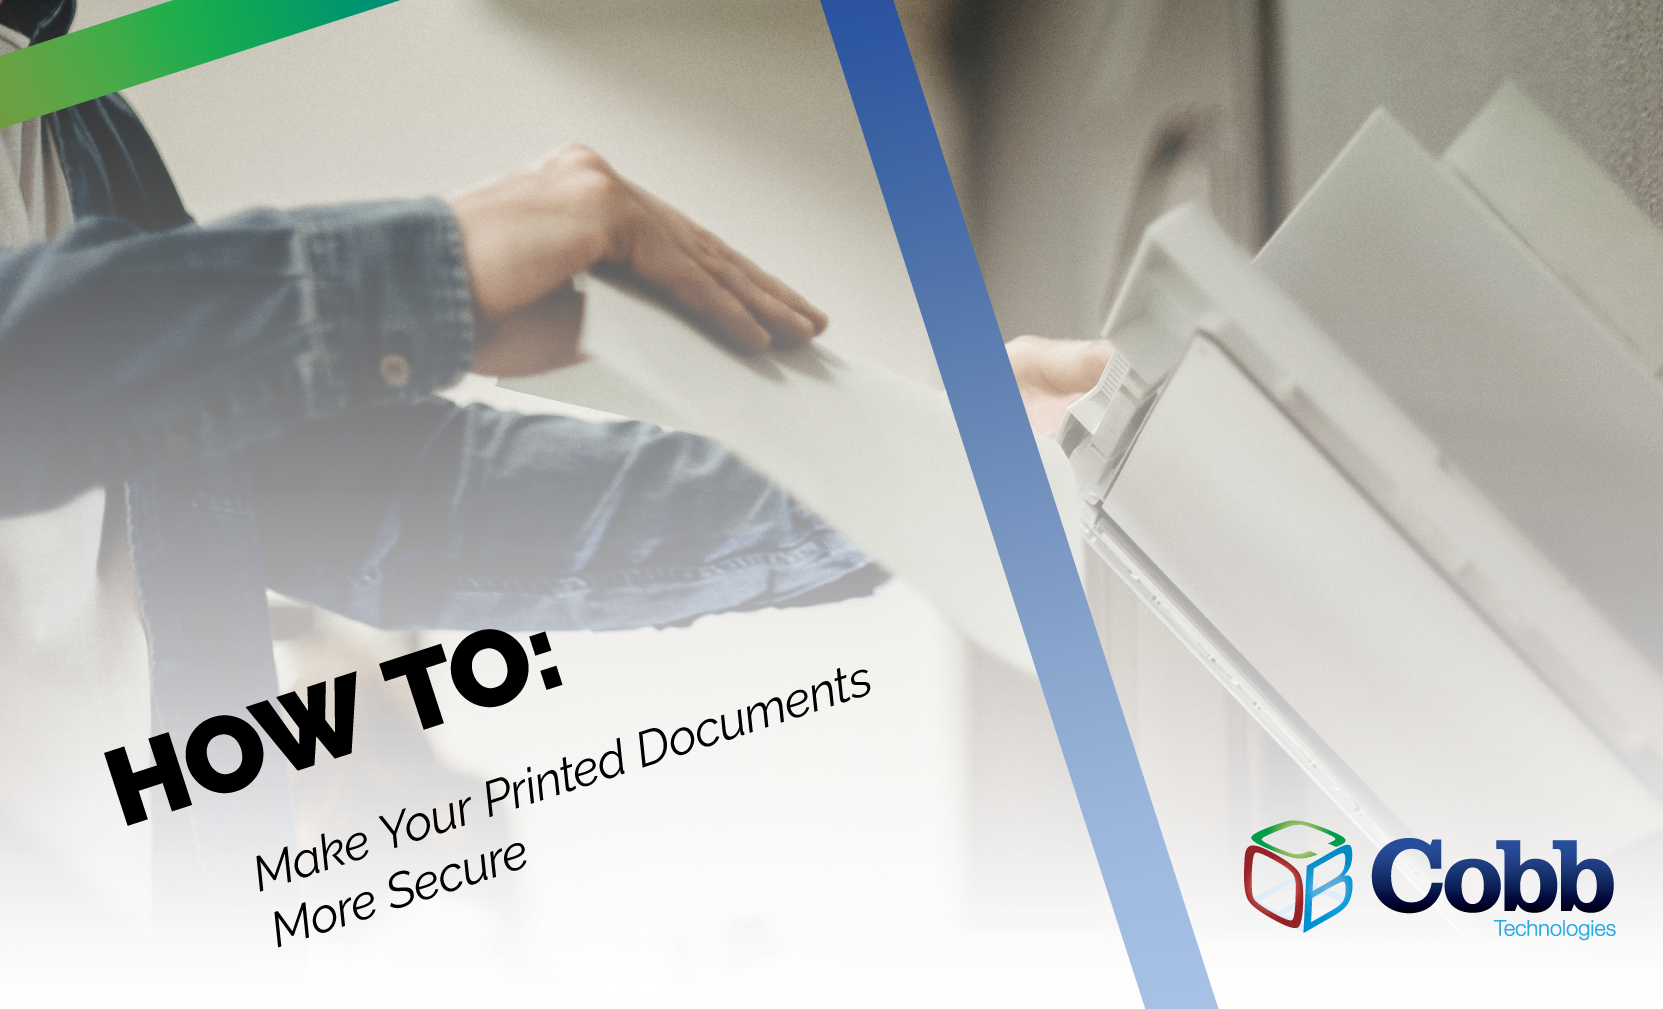 How to enhance the security of your printed documents